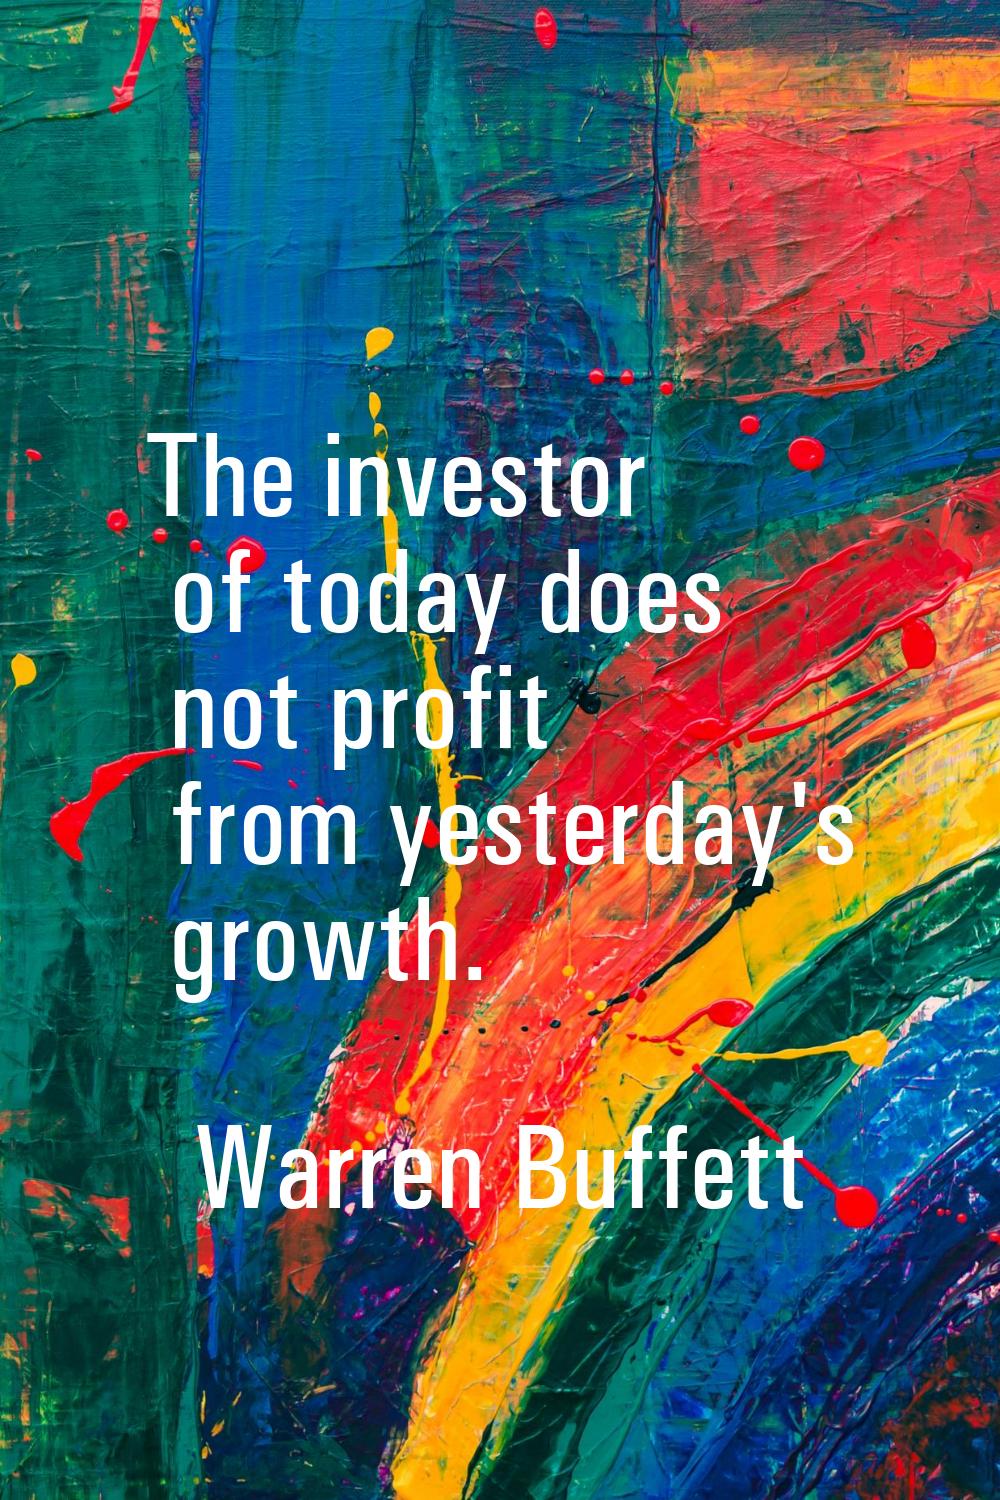 The investor of today does not profit from yesterday's growth.